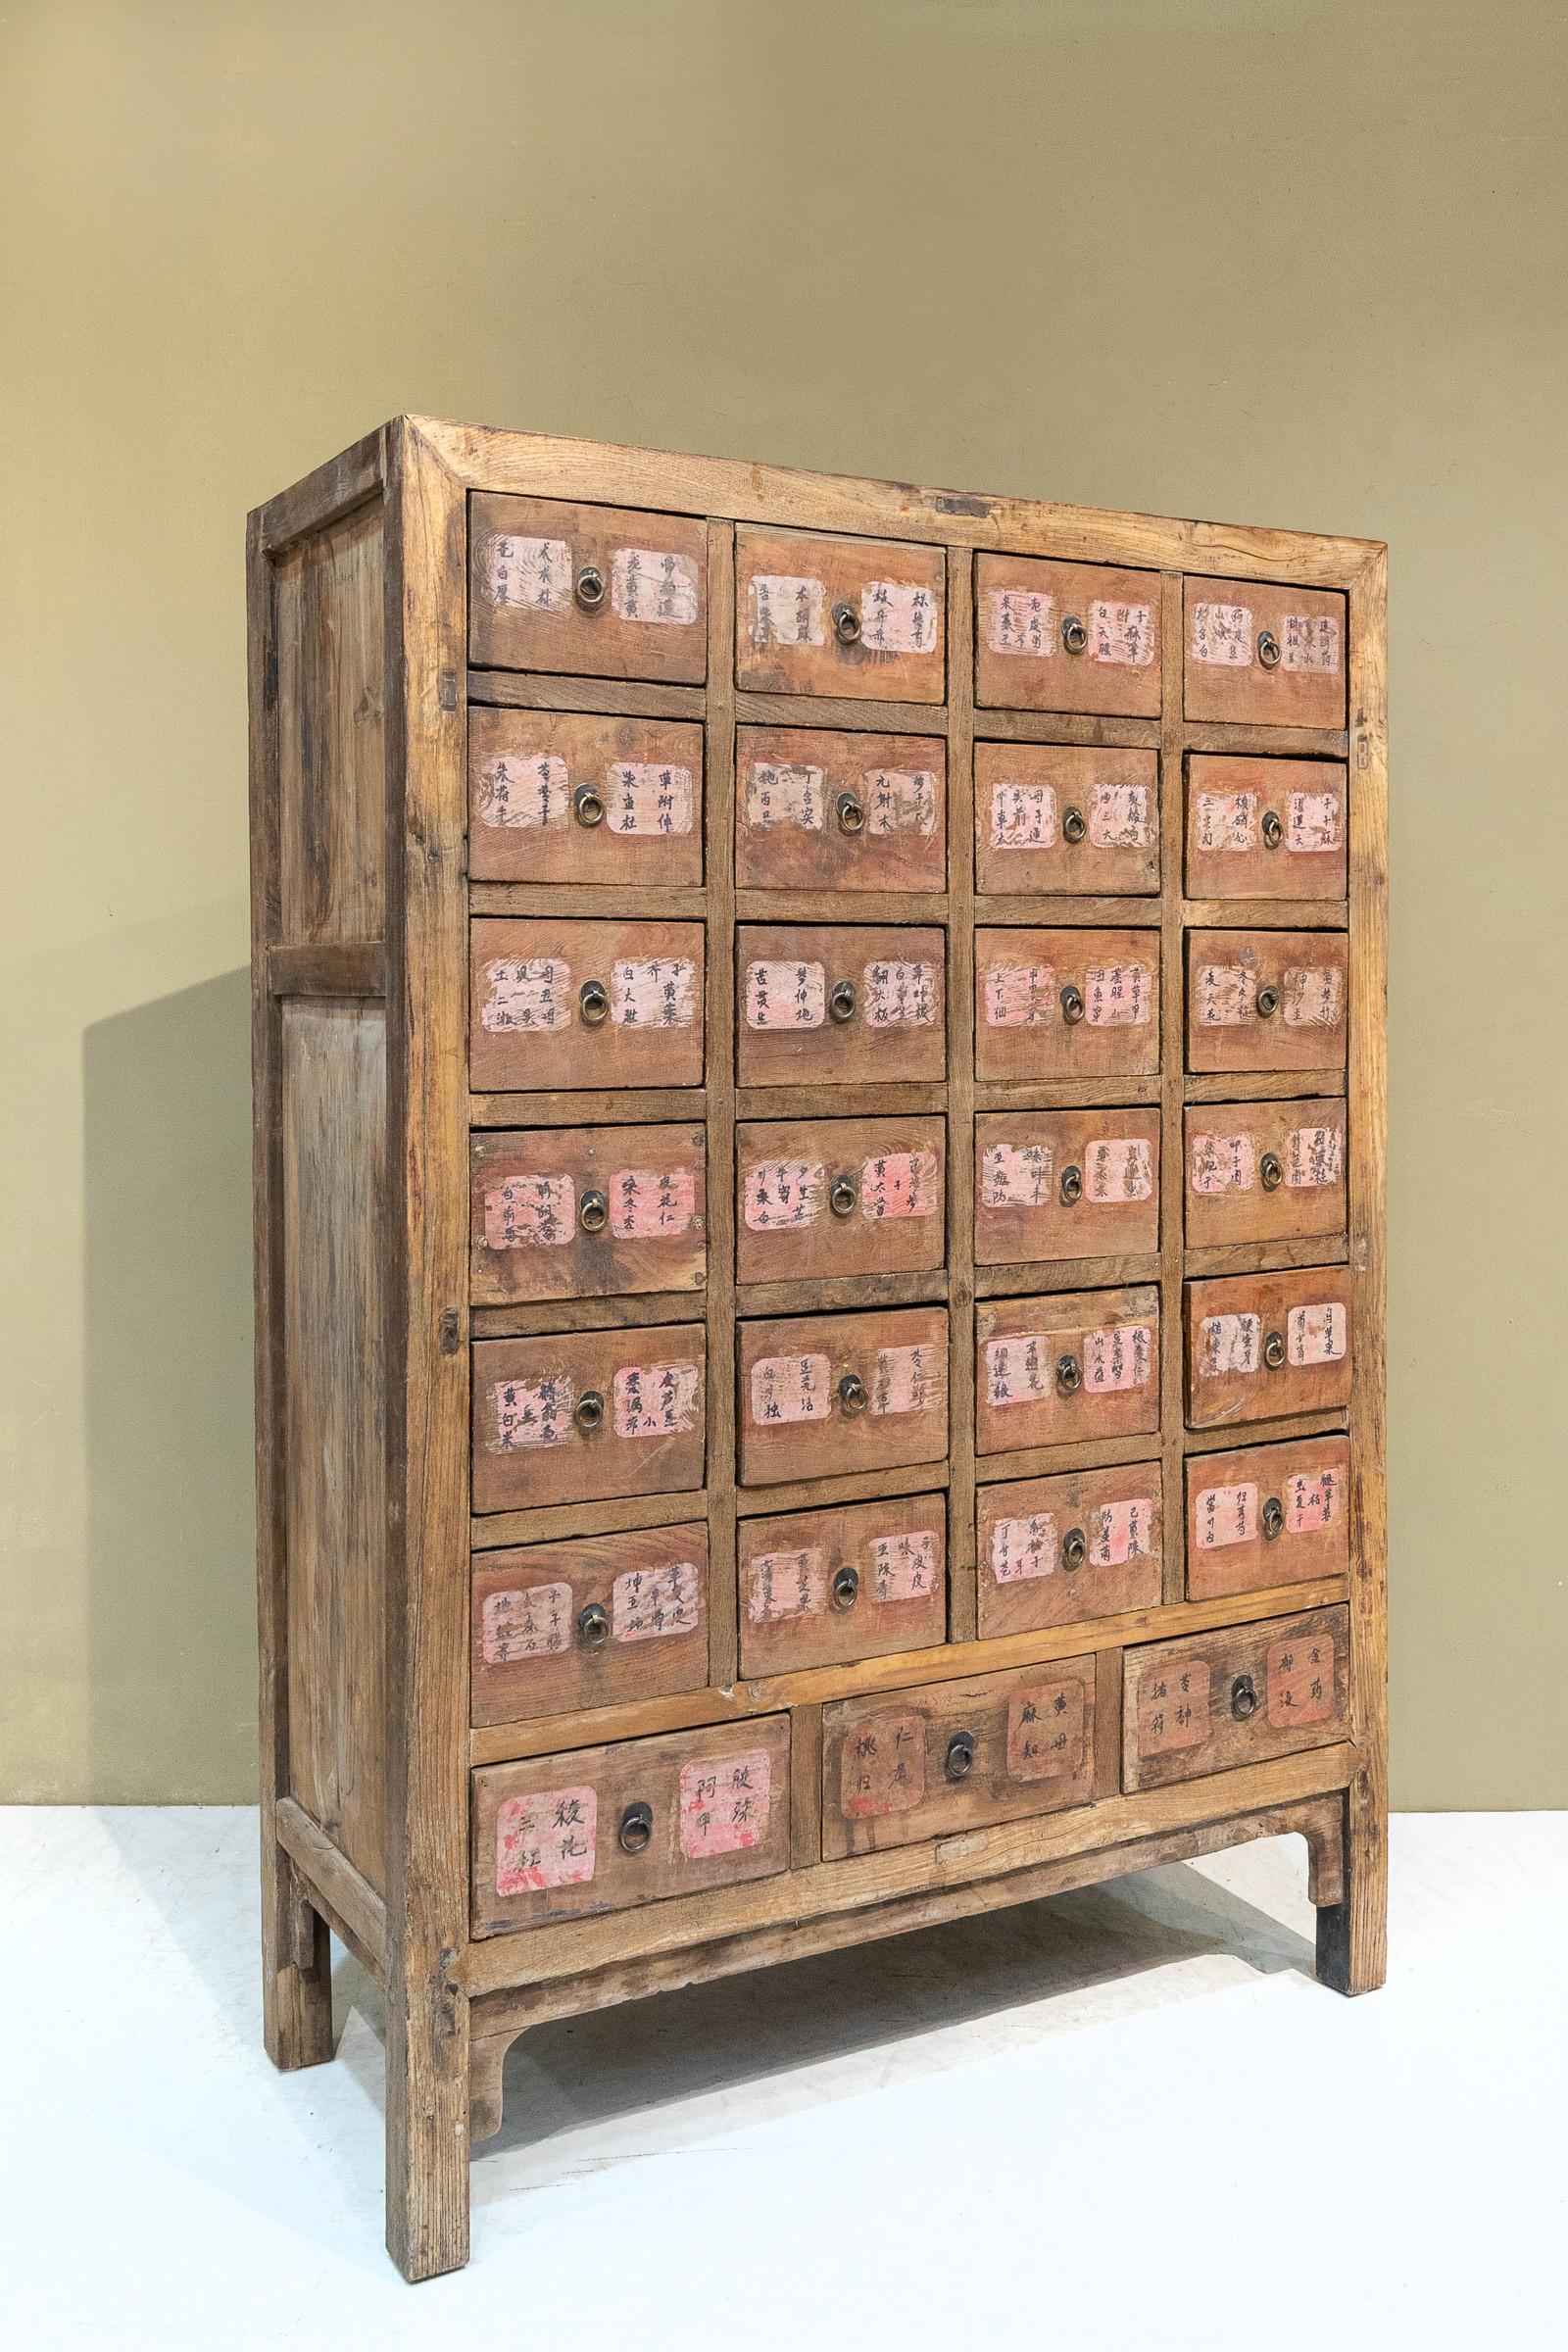 Early 20th century Chinese apothecary cabinet from Shanxi province, China. These were used to store and organize Chinese herbs and the names of the herbs kept in each drawer are written on the front. The names in this case were written on thin red